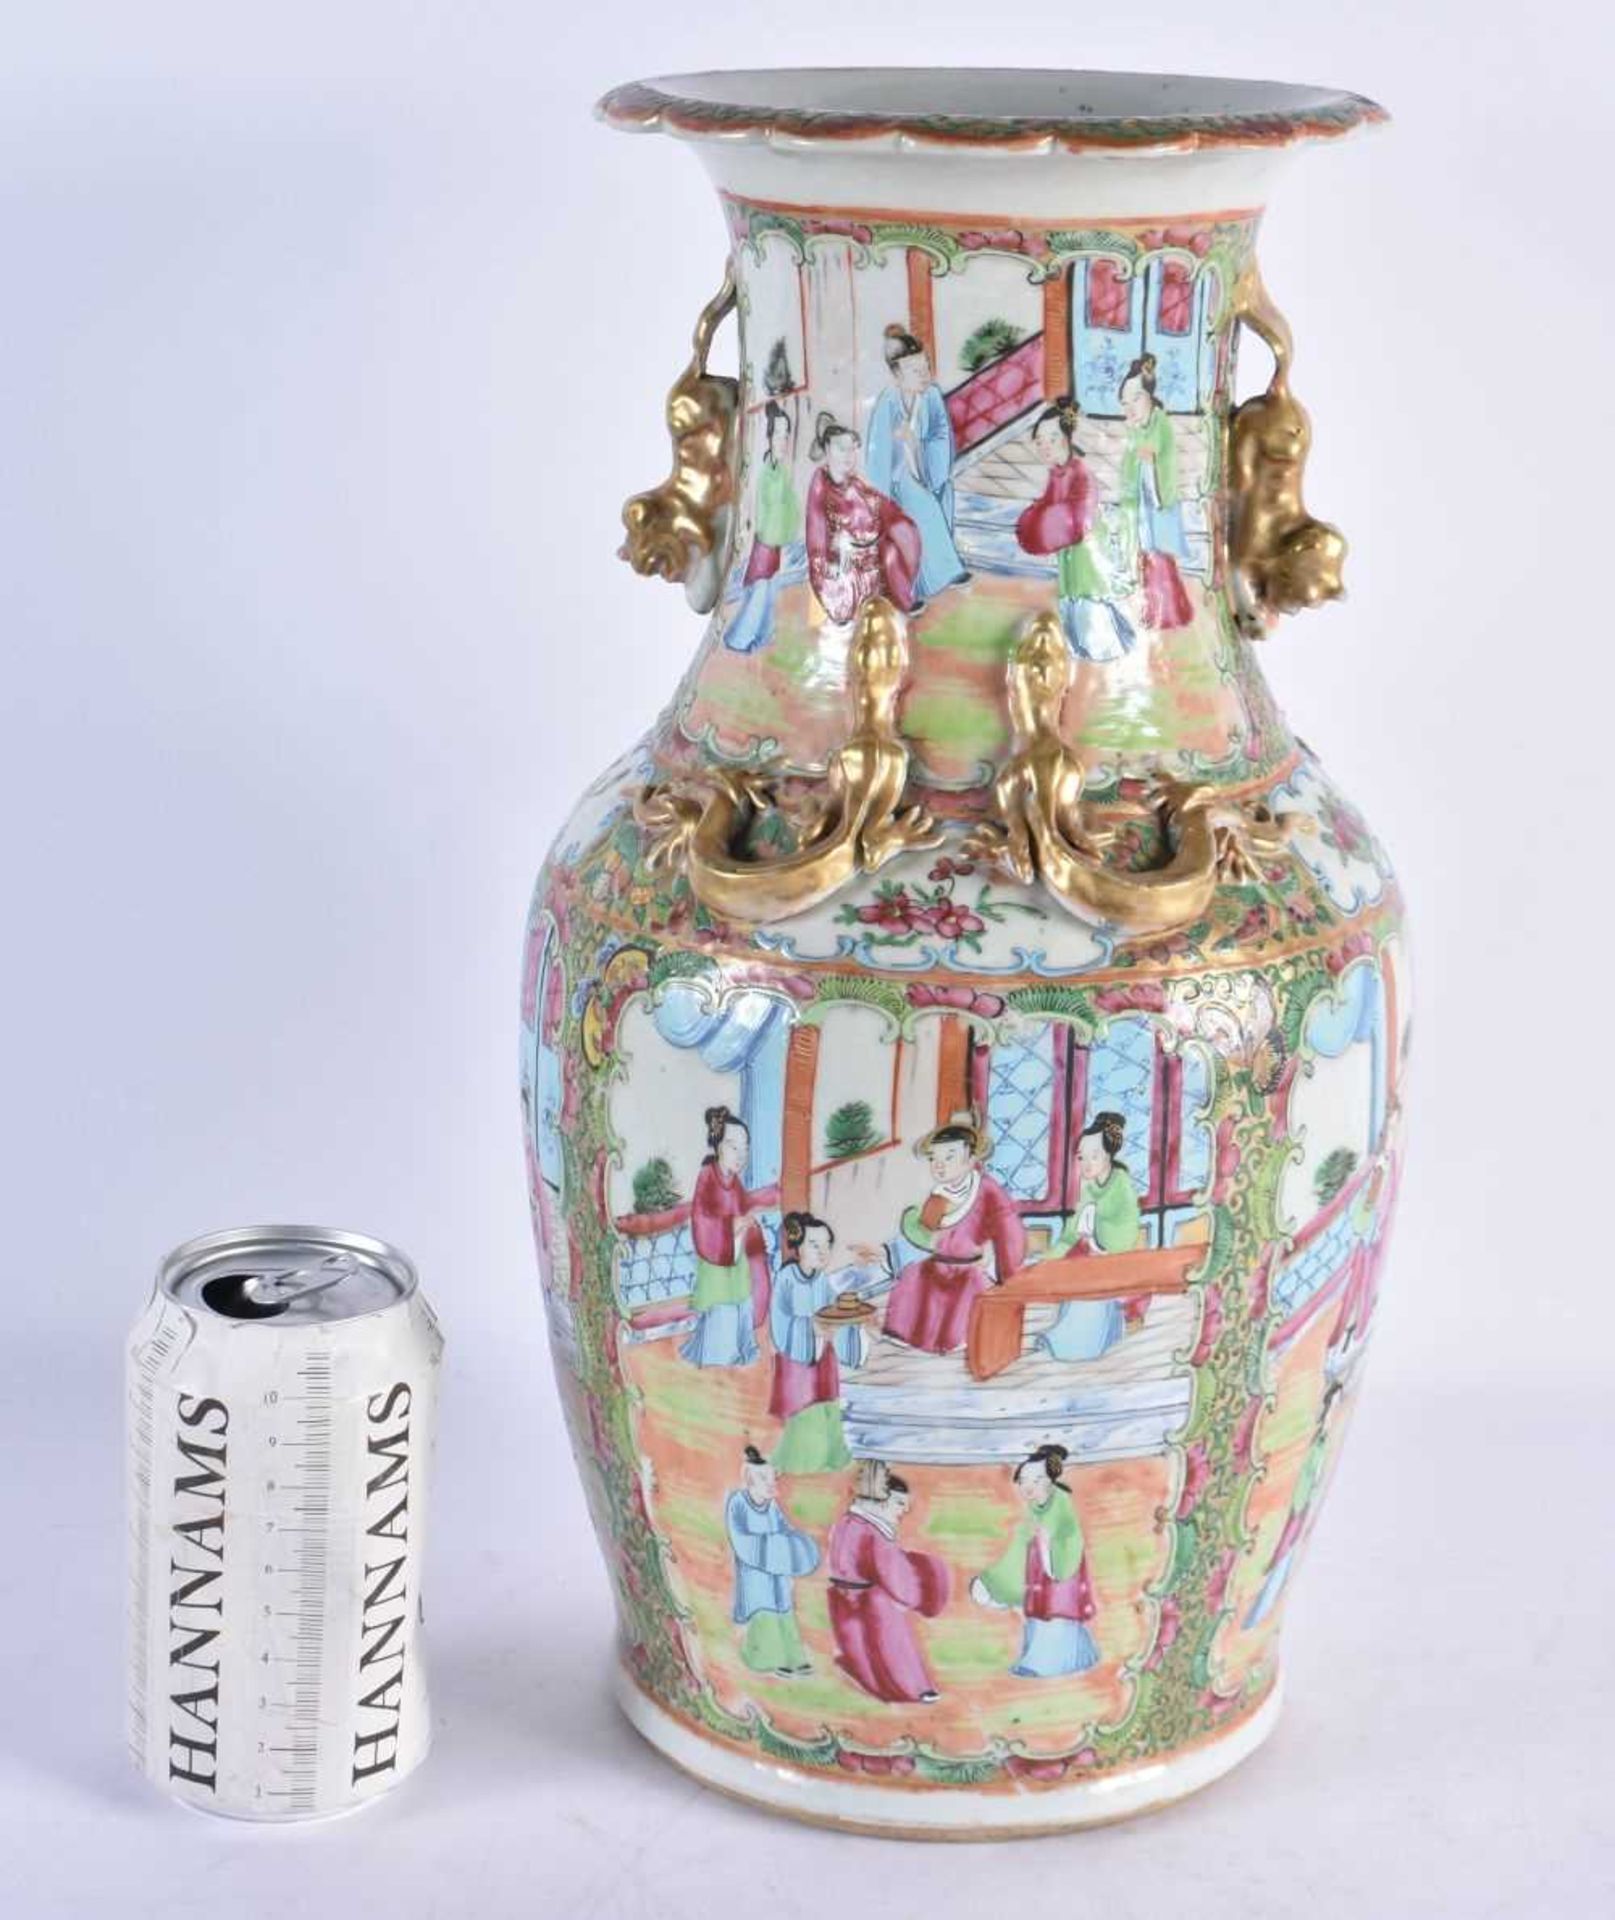 A LARGE 19TH CENTURY CHINESE CANTON FAMILLE ROSE PORCELAIN VASE Qing, painted with figures and